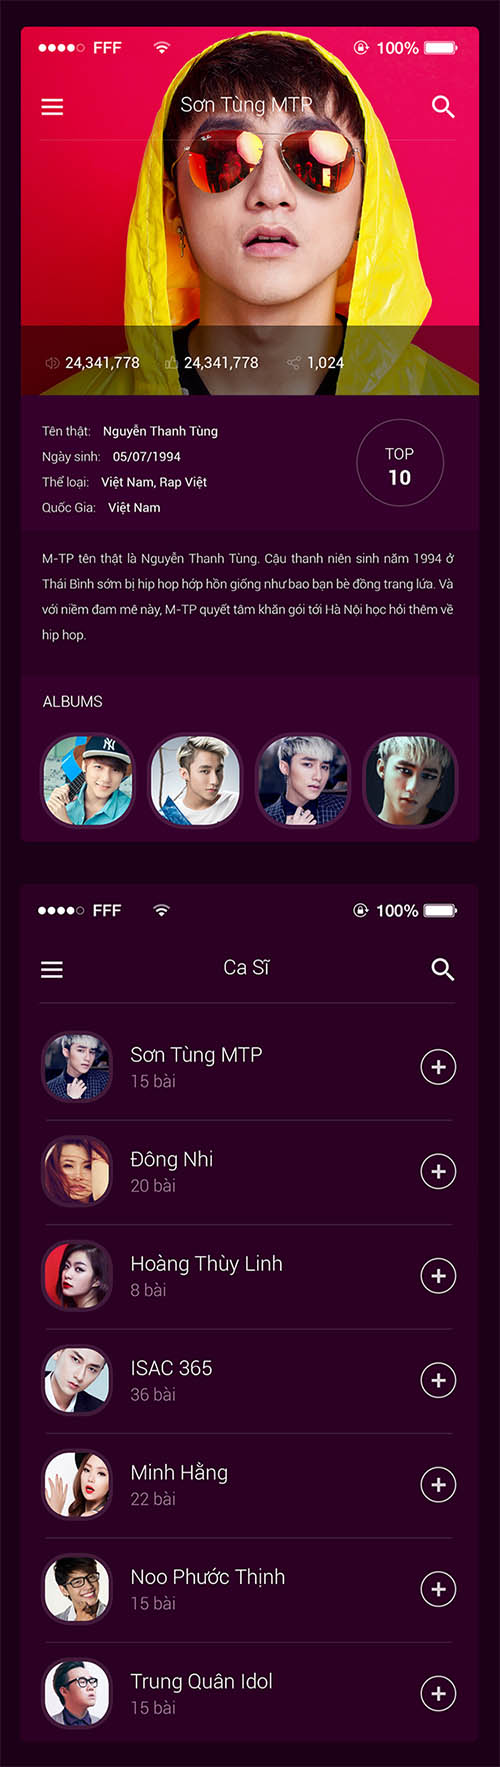 New Project | Music app By Ha Truong